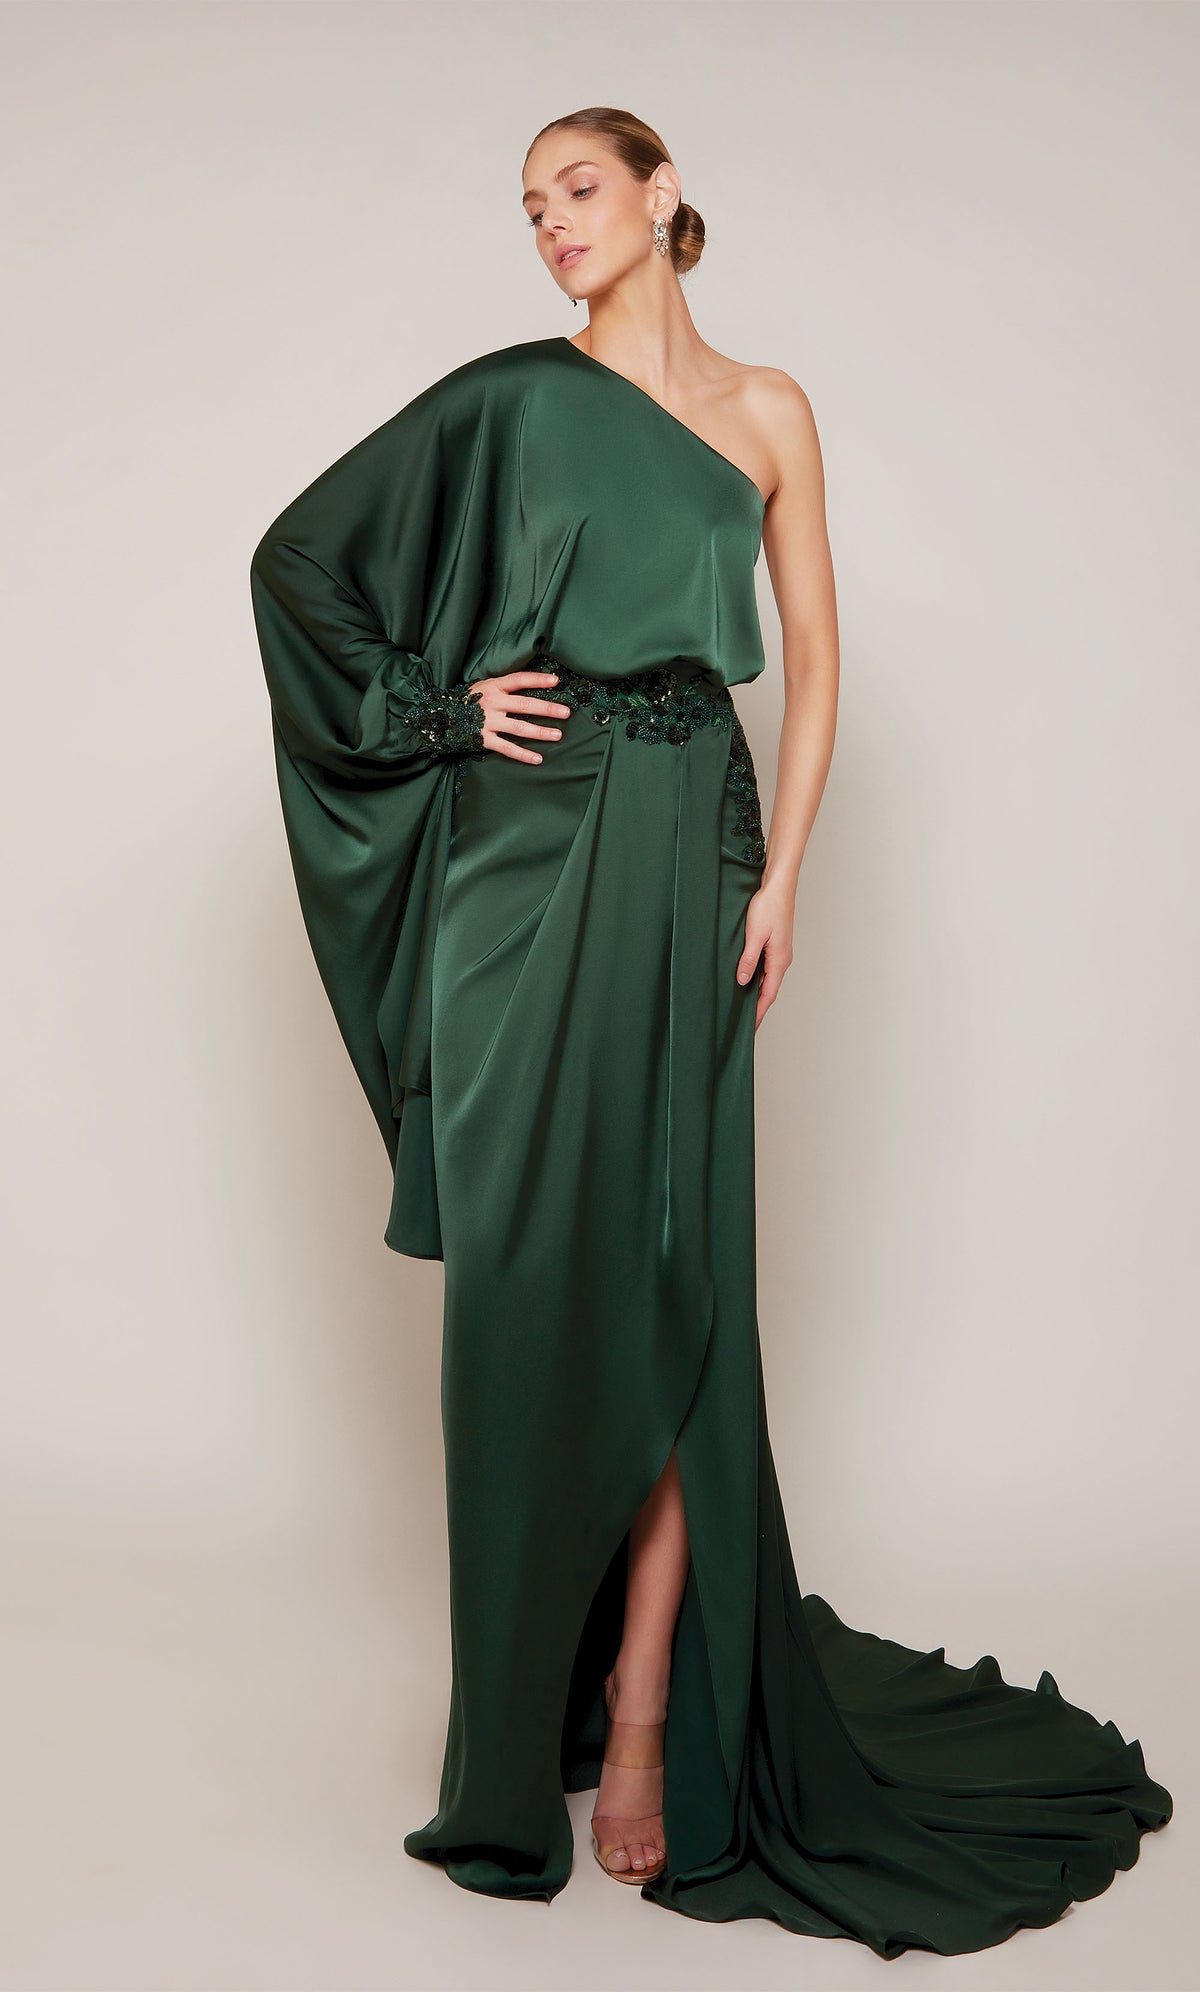 A draped satin evening gown with a one shoulder neckline, beaded waistline, side slit, and train in a rich forest green.